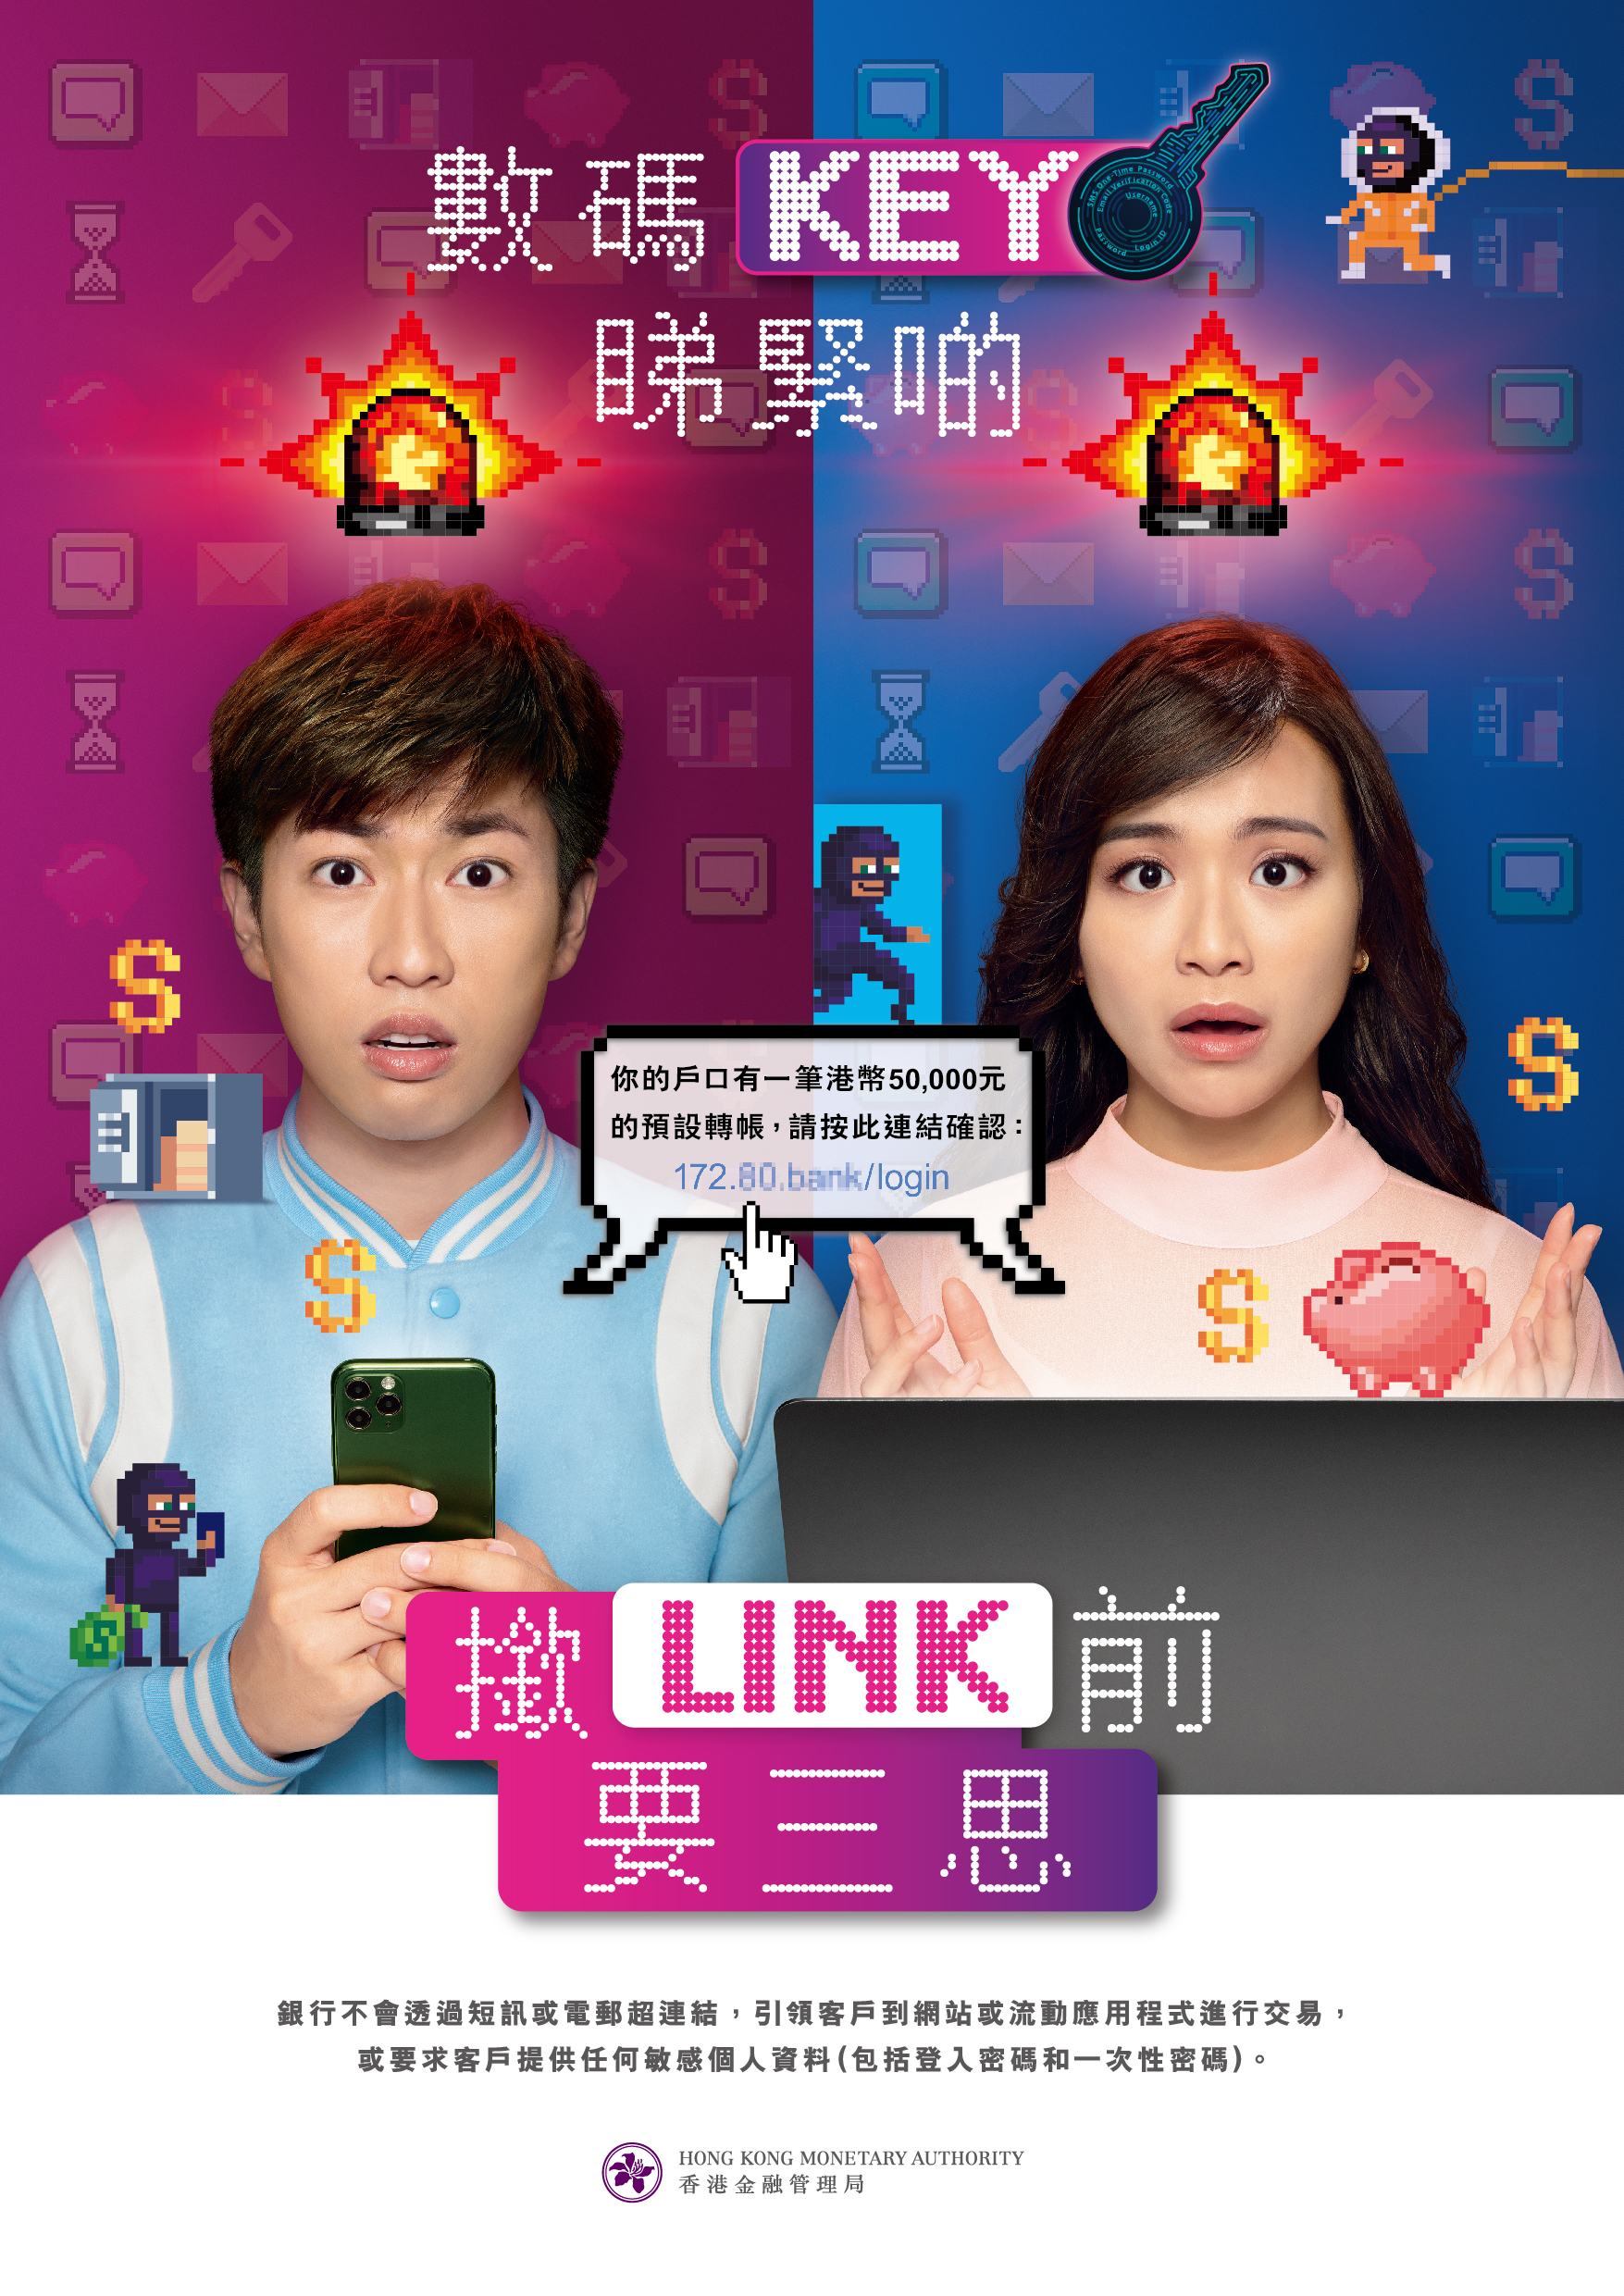 Advertisement - Protect your Personal Digital Keys, Beware of Fraudulent Links! (Chinese version only)